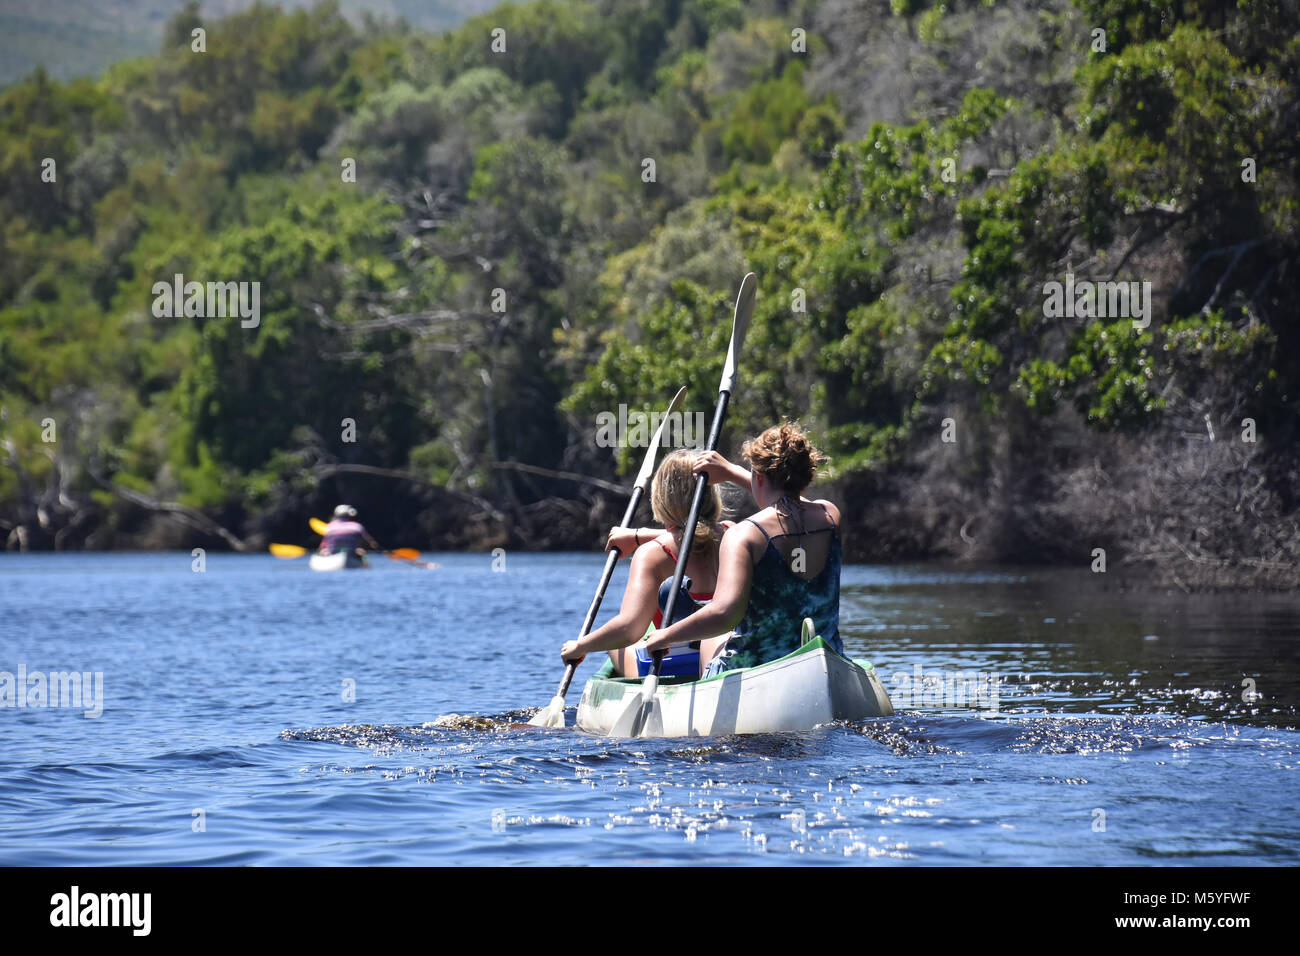 Two female tourists Kayaking in a double kayak in Goukamma near Knysna on the Garden Route in South Africa Stock Photo